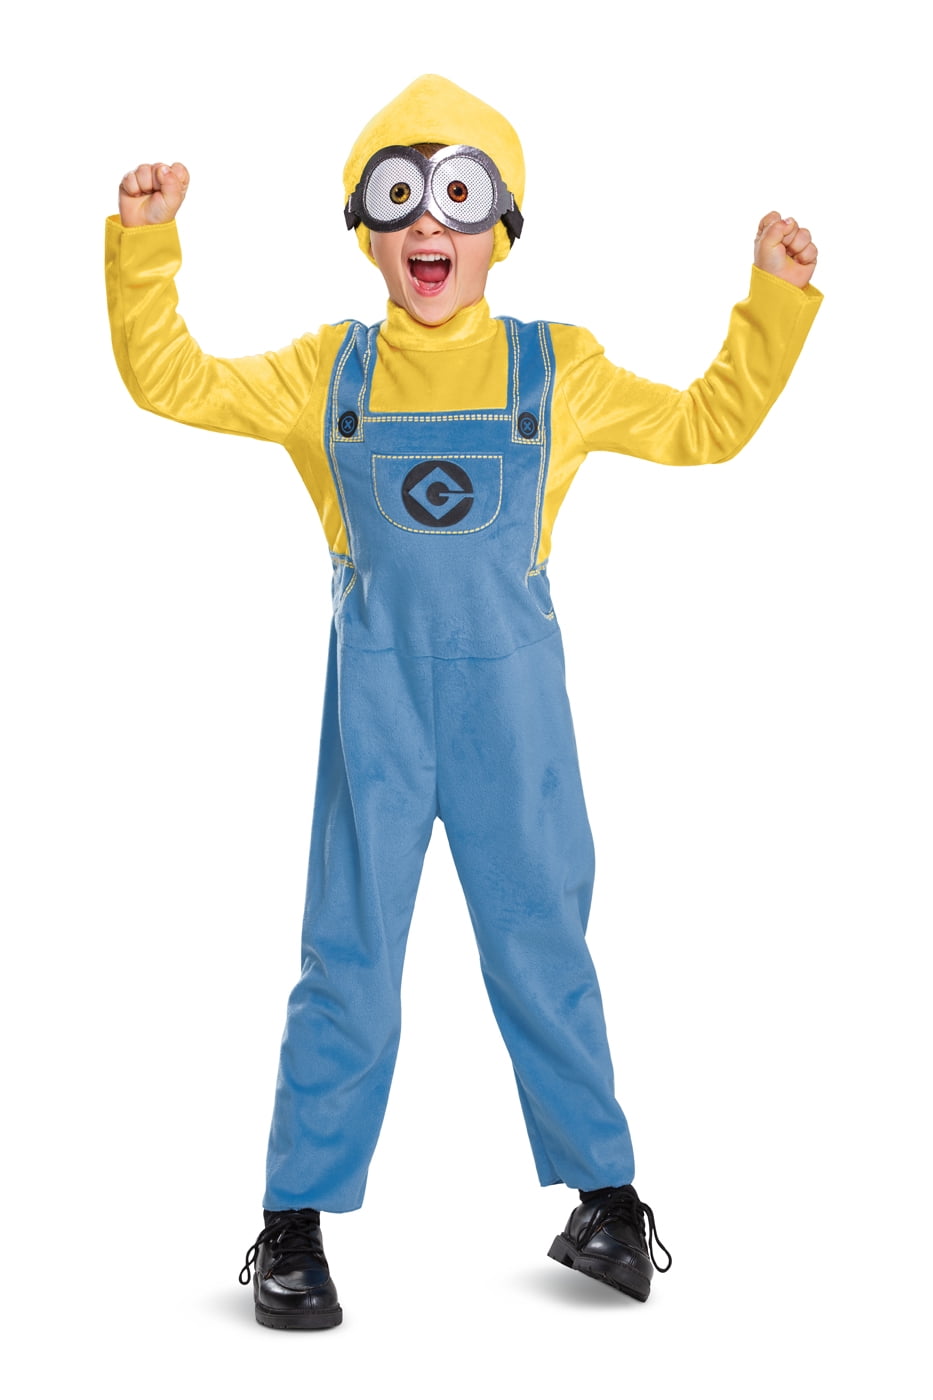 Bob Minions Costume for Toddler, Official Minion Jumpsuit for Kids, Classic Size Small (4-6)